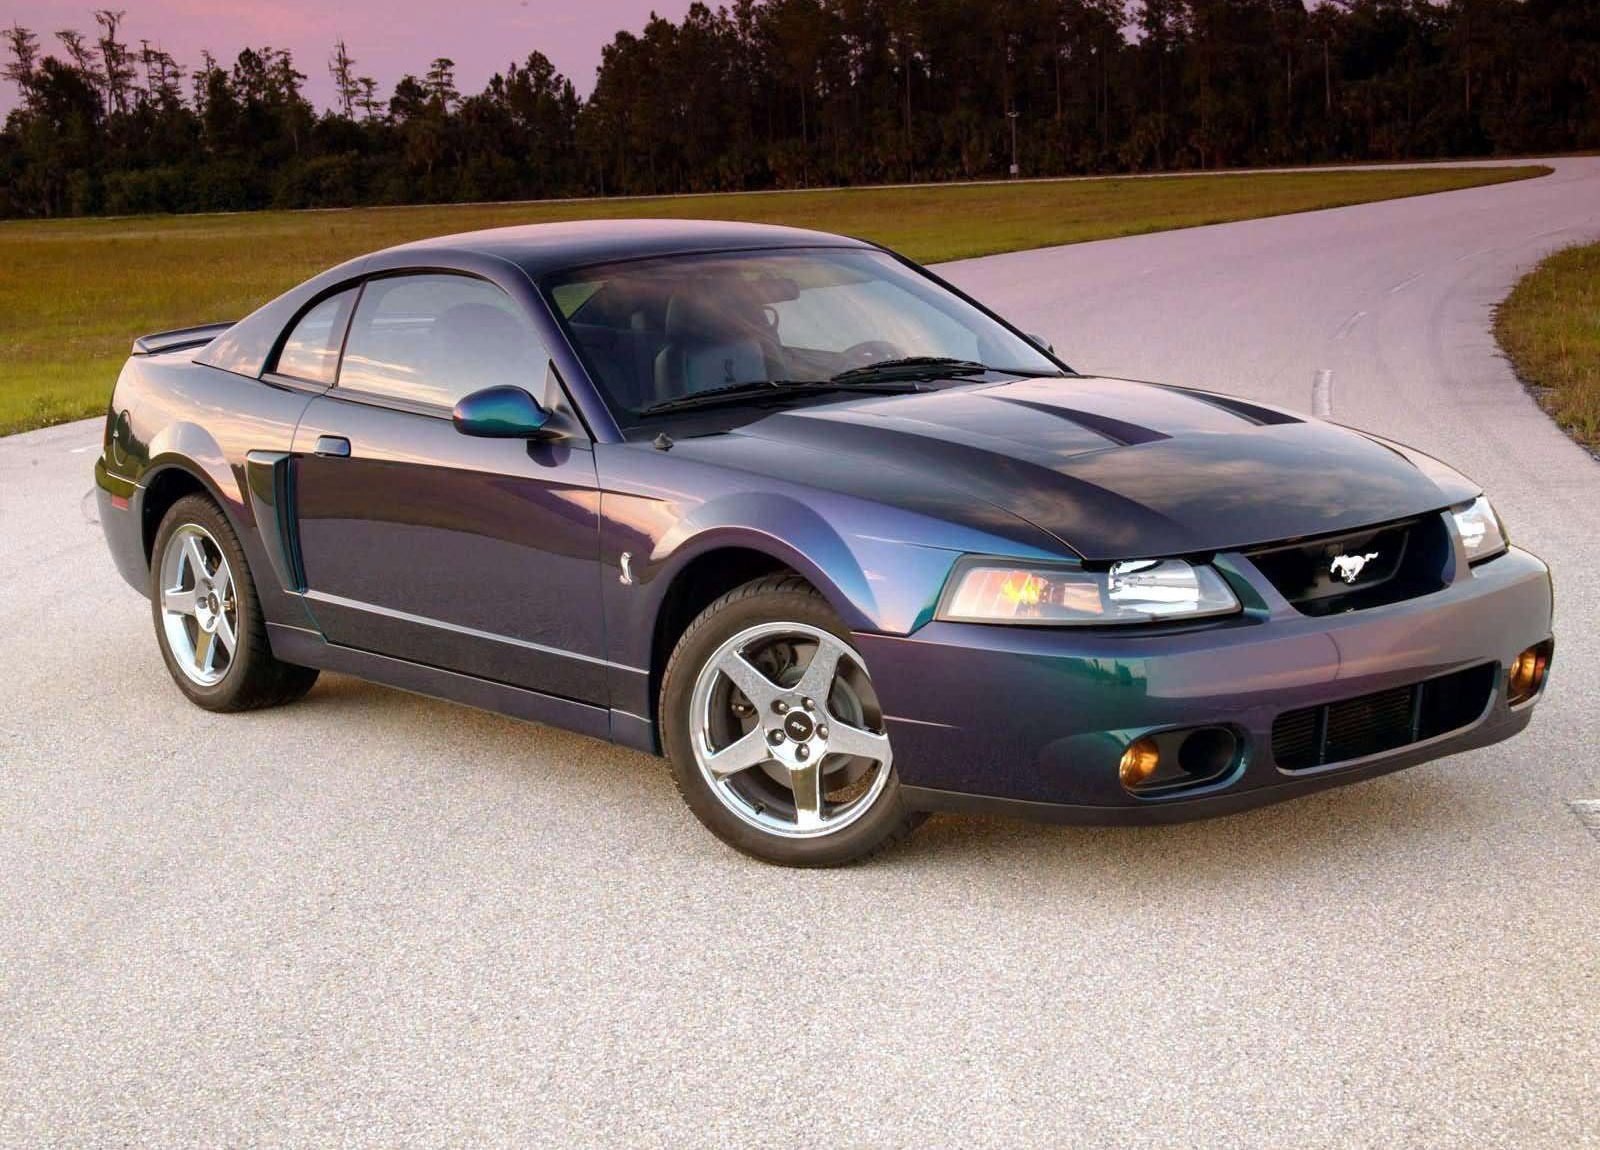 How much horsepower does a 2004 ford mustang cobra have